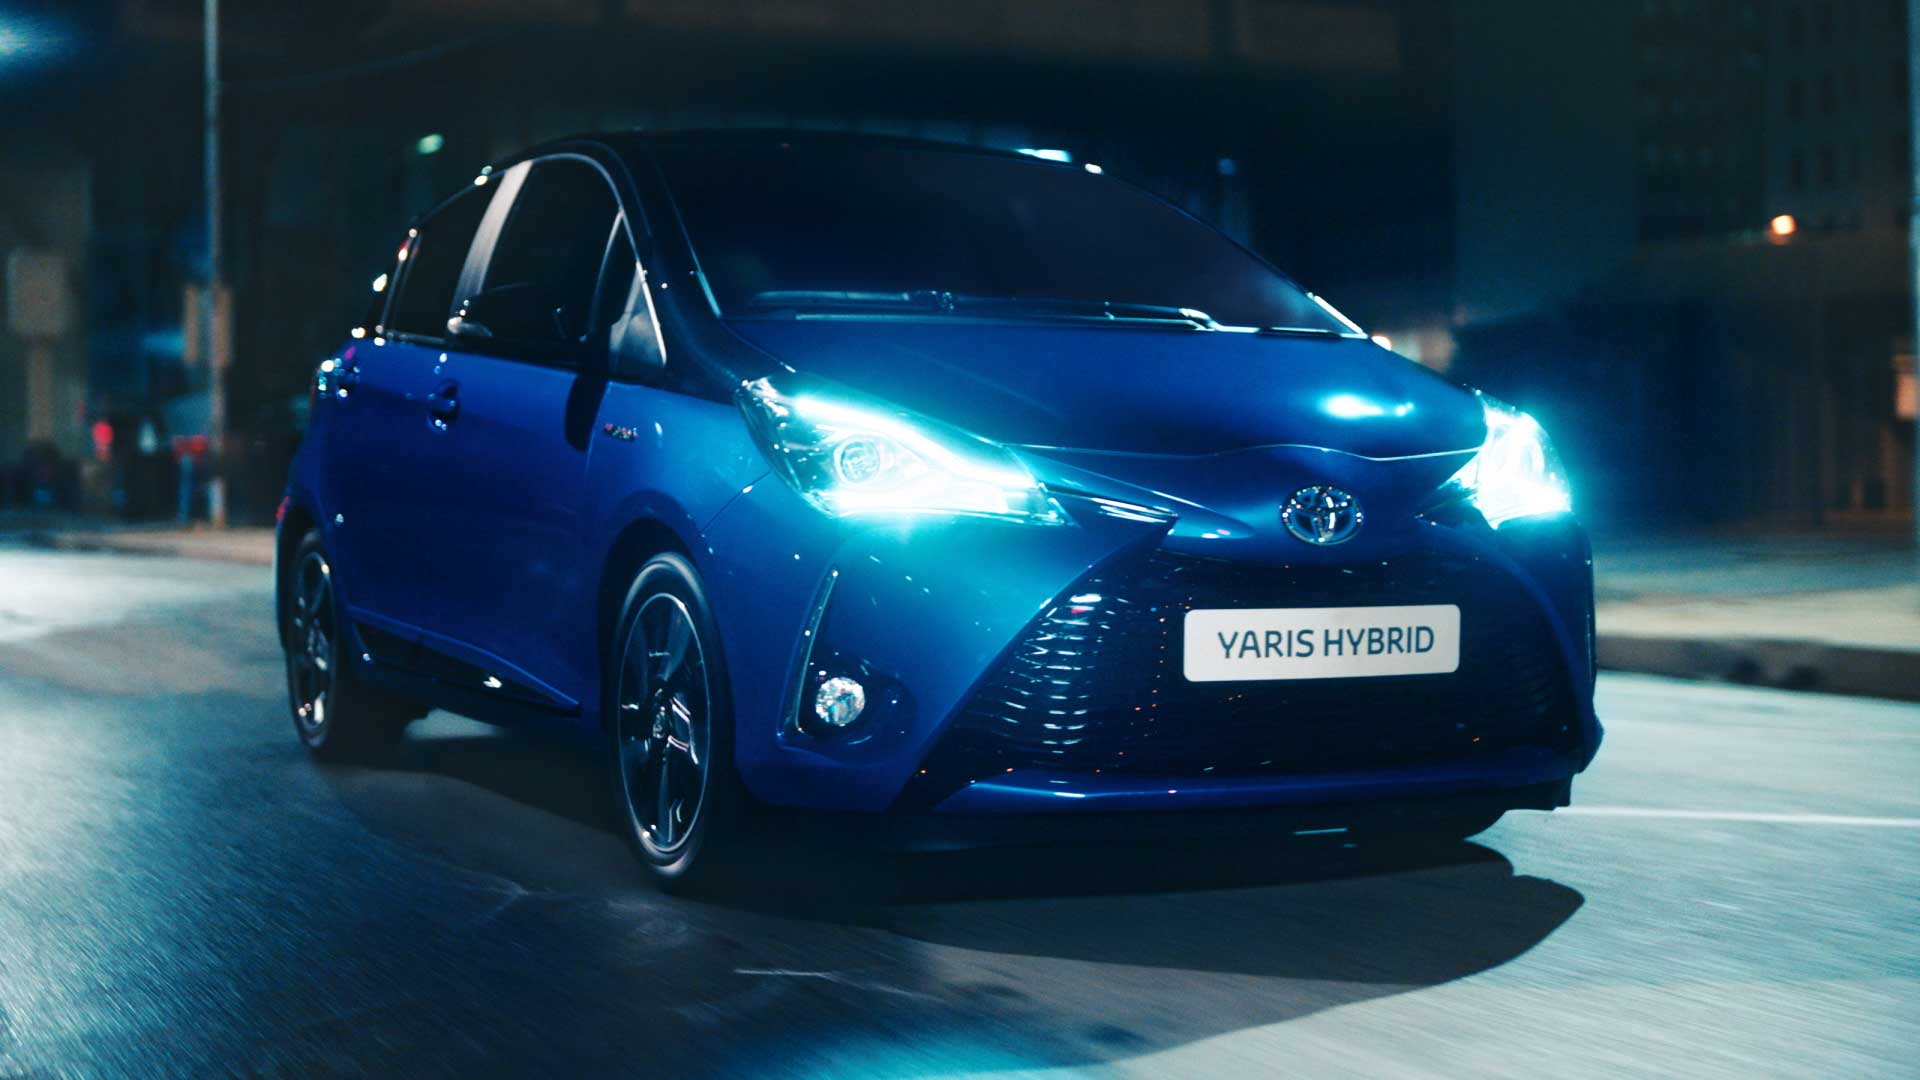 Car with lights. Still from Toyota Yaris commercial.